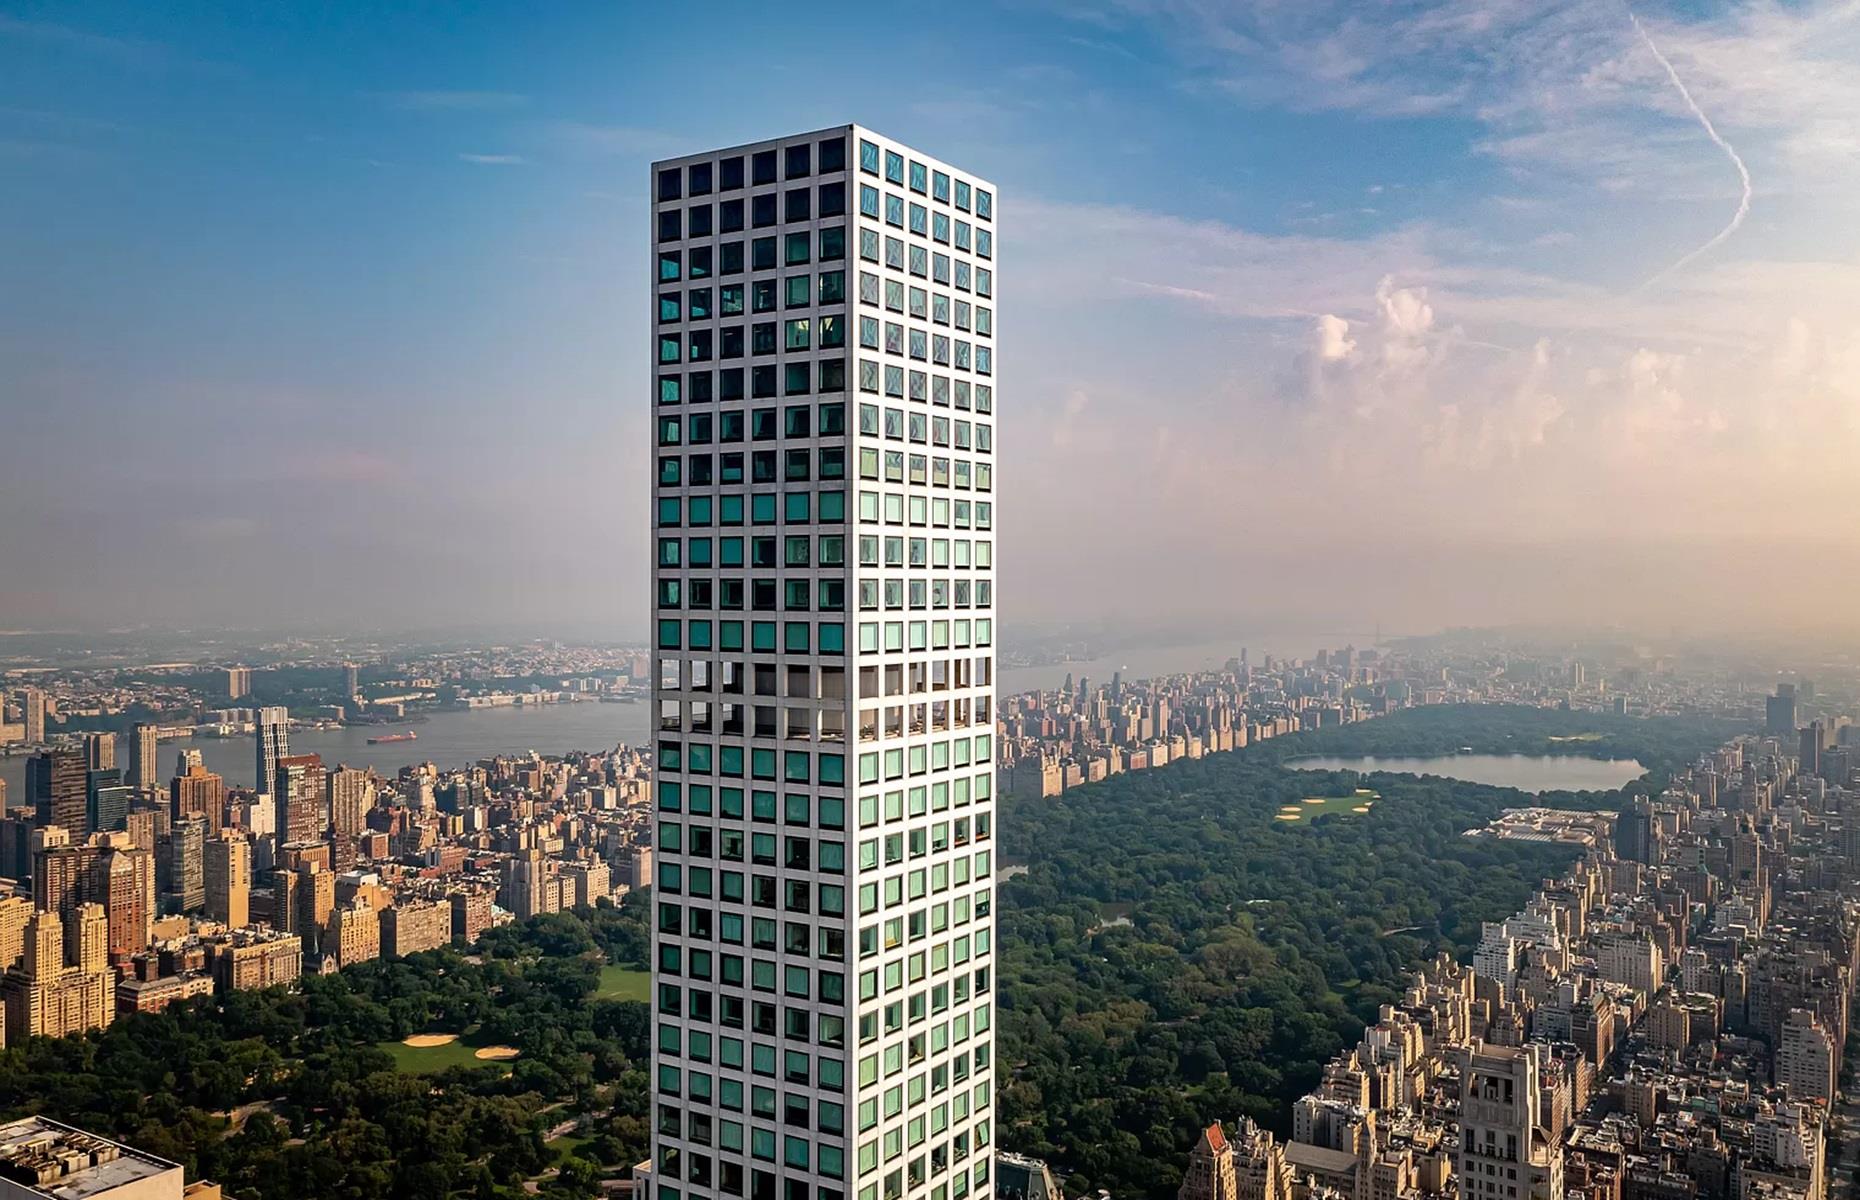 <p>At 1,396 feet, it was hailed the tallest residential tower in the Western Hemisphere when completed in 2015. Since then, 432 Park Avenue has been surpassed by Central Park Tower and 111 West 57th Street, but <a href="https://vinoly.com/">Rafael Viñoly’s</a> minimalist design still holds its own on the New York skyline. As does its penthouse on the 79th floor, which was previously <a href="https://nypost.com/2023/10/24/real-estate/a-432-park-home-once-asking-135m-sells-for-65-6m/">for sale</a> for a monumental $135 million but finally sold for a cut price of $65.6 million. </p>